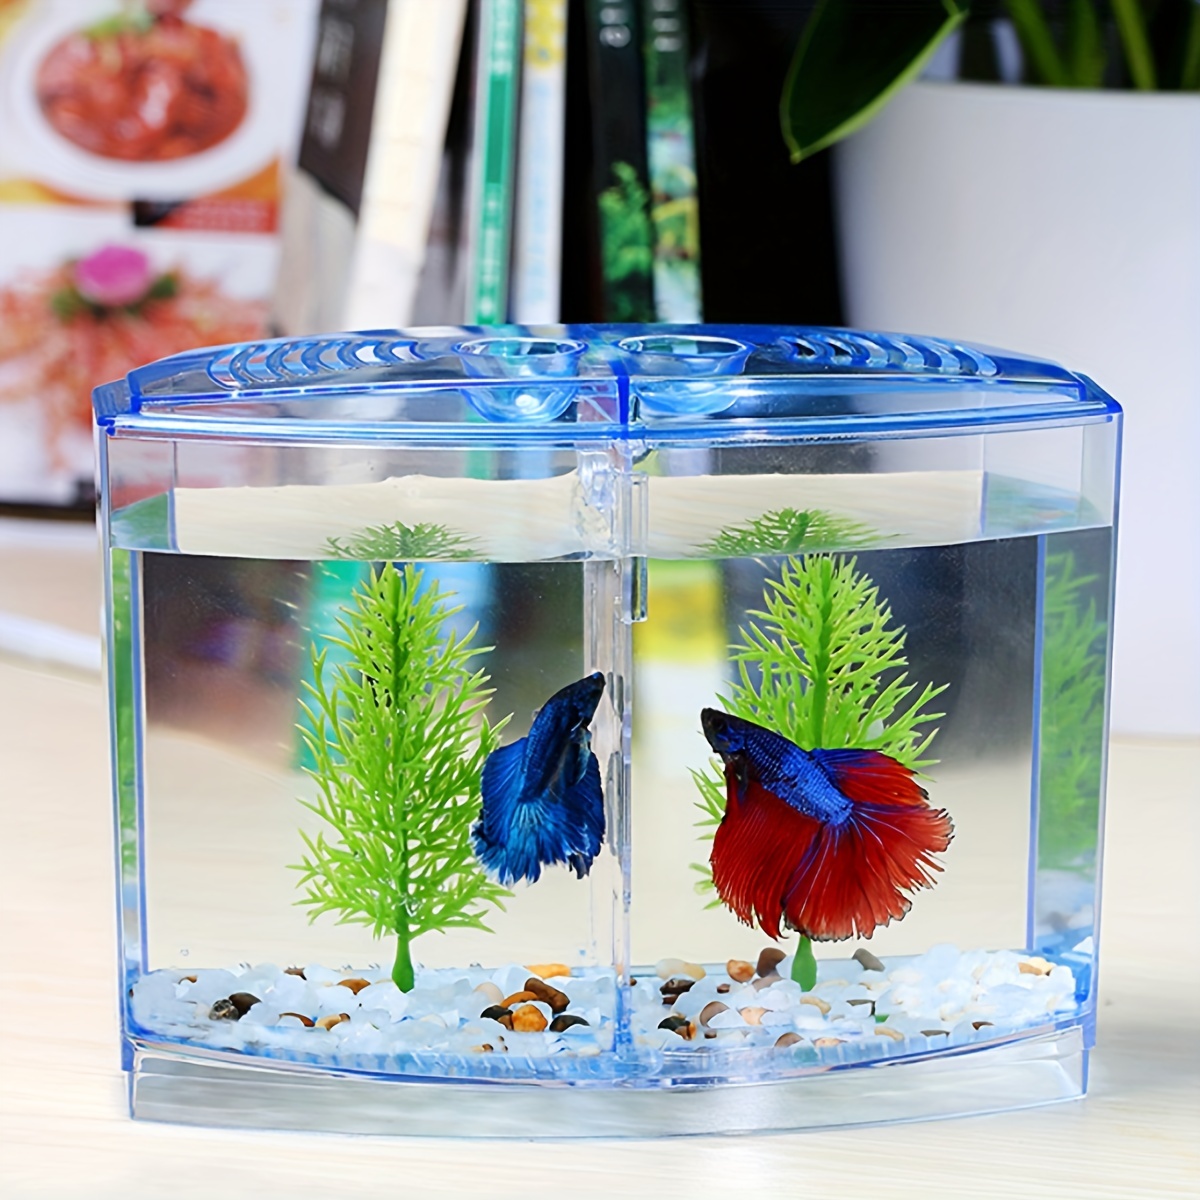 Small Betta Fish Tank, Aquarium Stater Kit, Fish Bowl Tank Set With Decor  Accessories, DIY Handmade Crafts, Xmas Gifts for Him / Her 